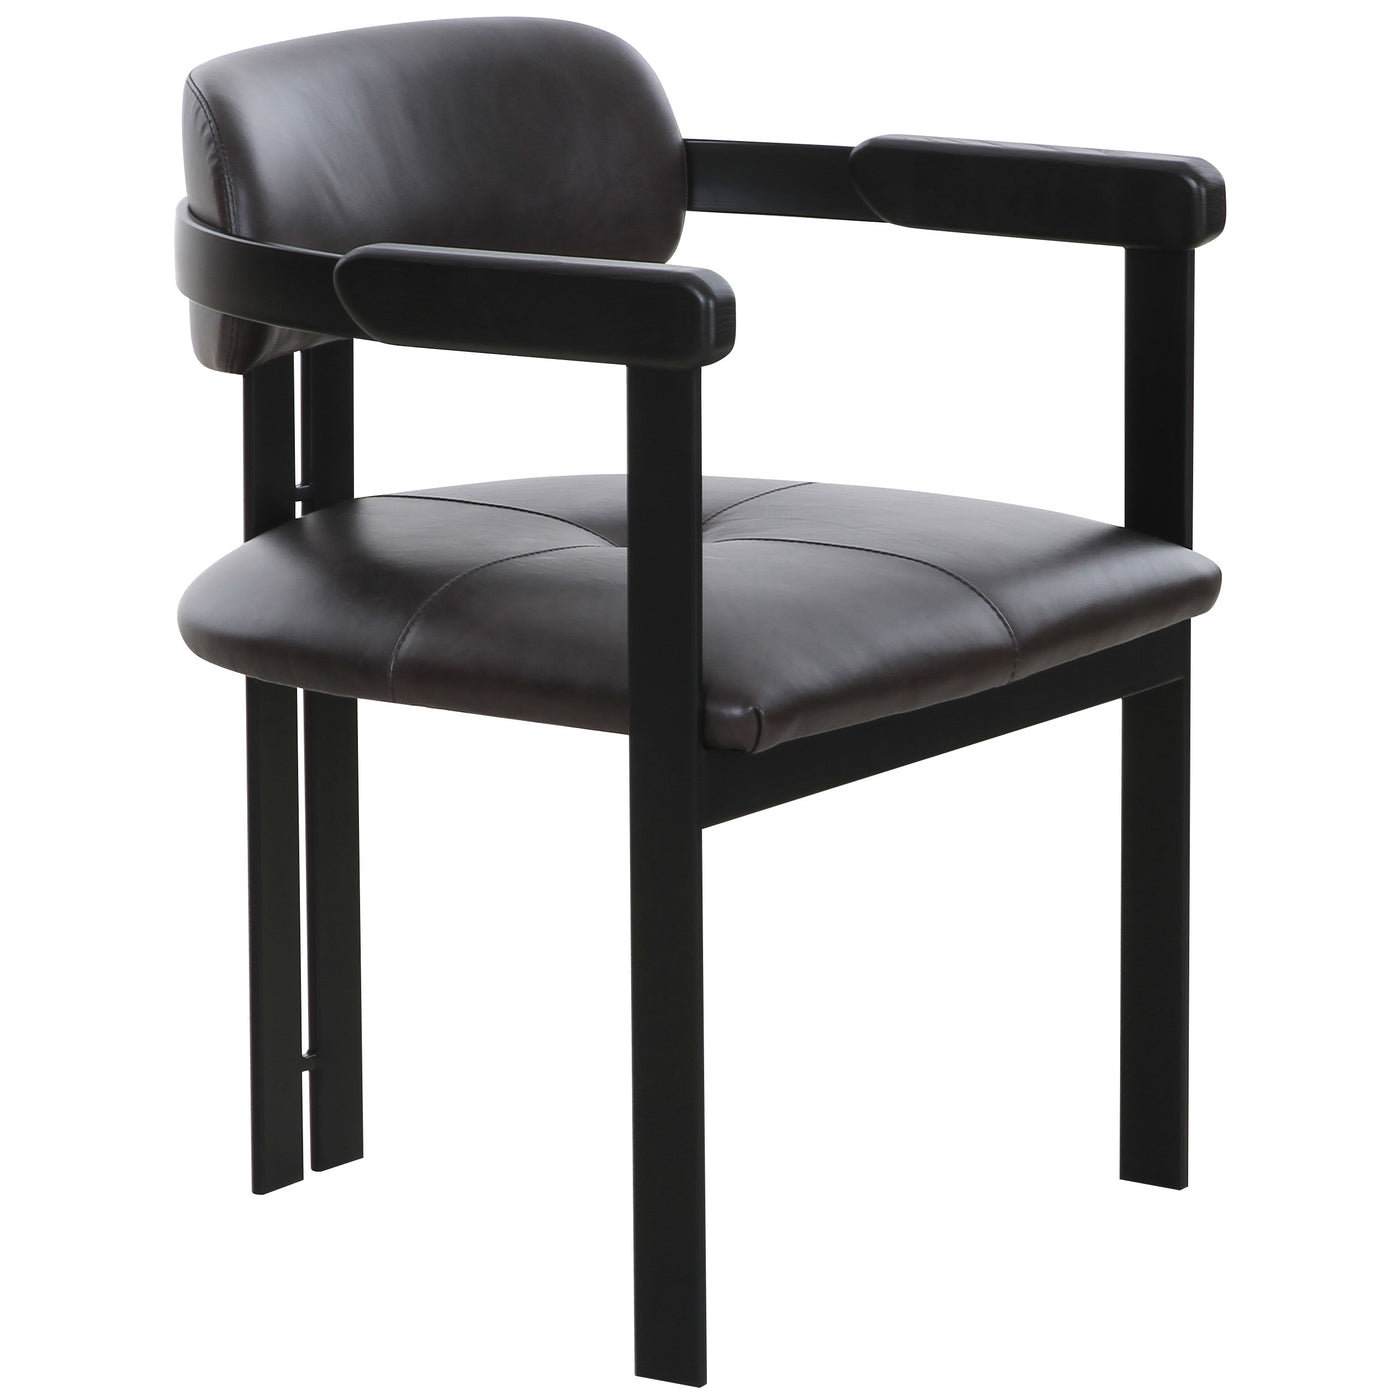 Galileo Black Leather Dining Chair